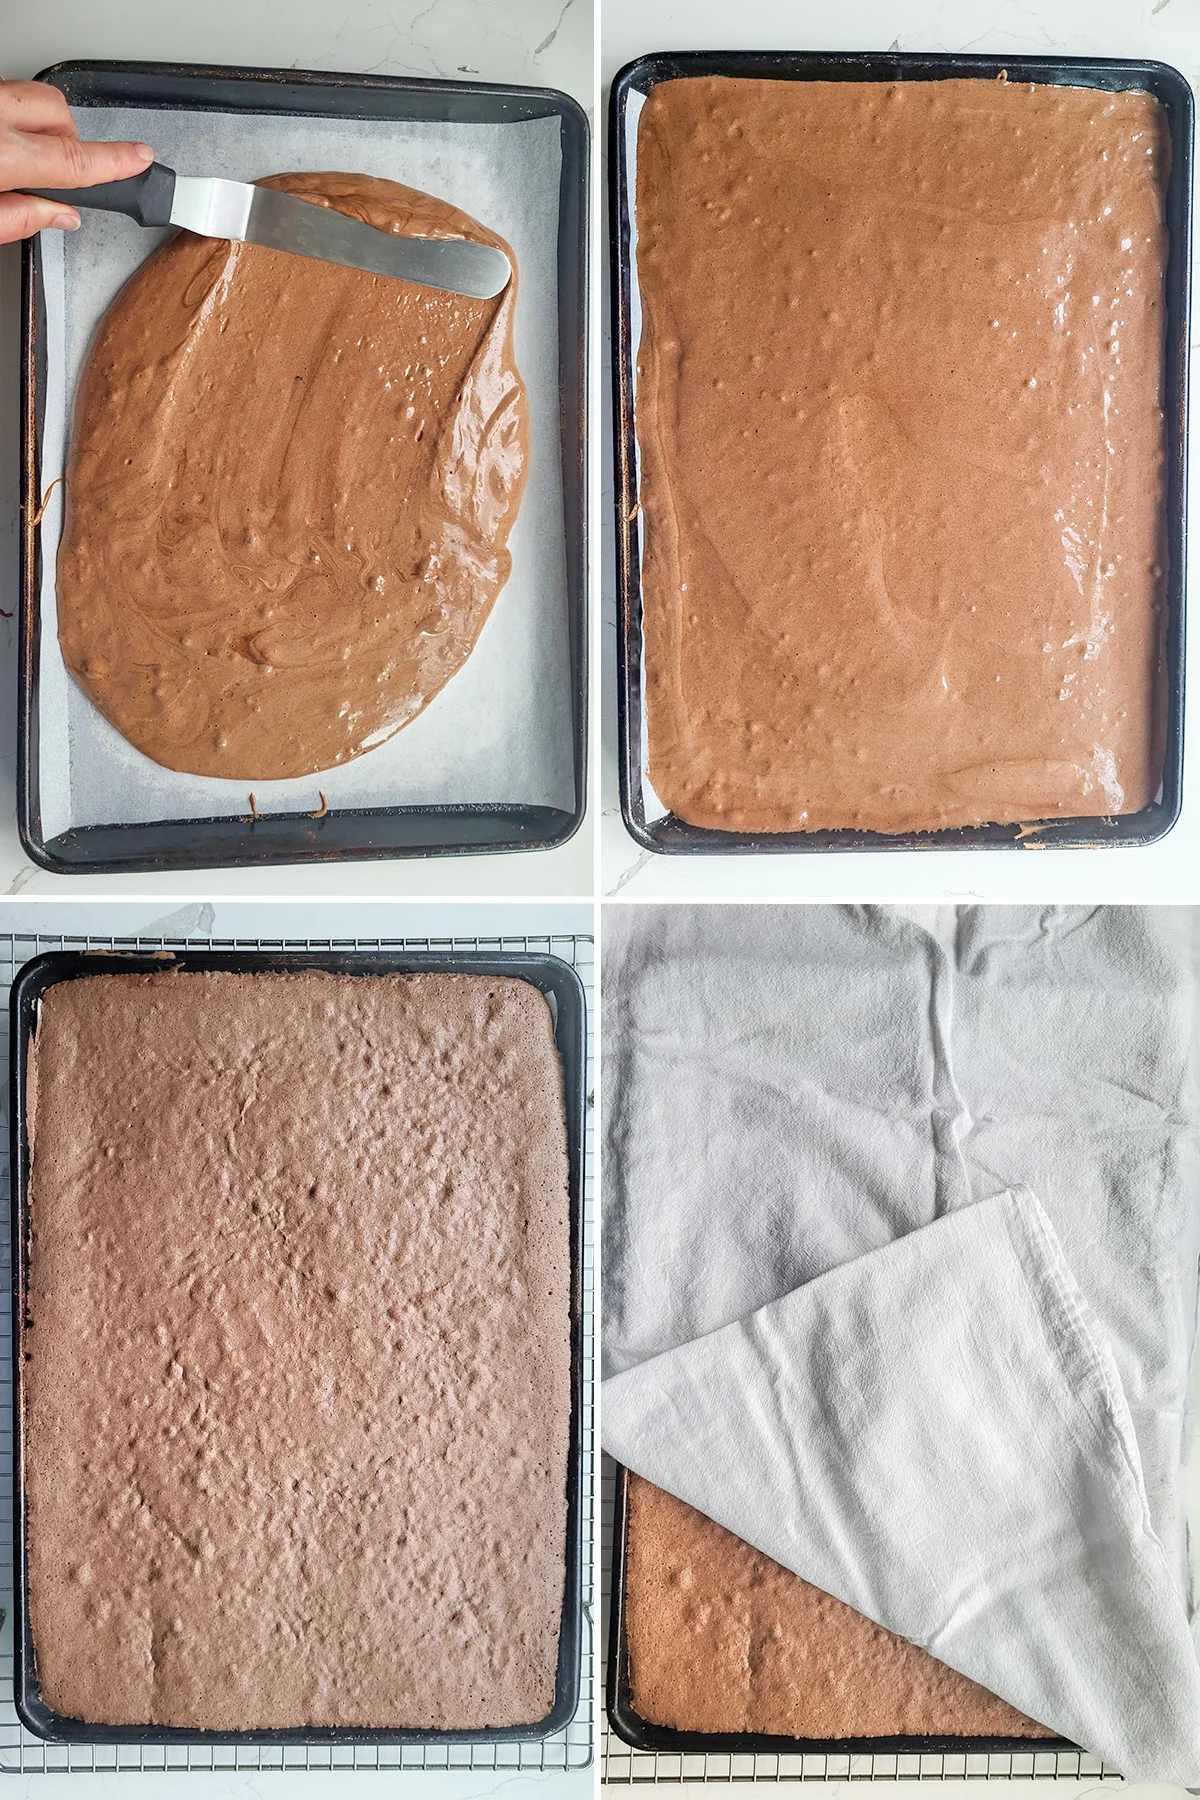 Spreading cake batter in a pan. A pan of cake batter. A baked cake and a cake covered with a kitchen towel.